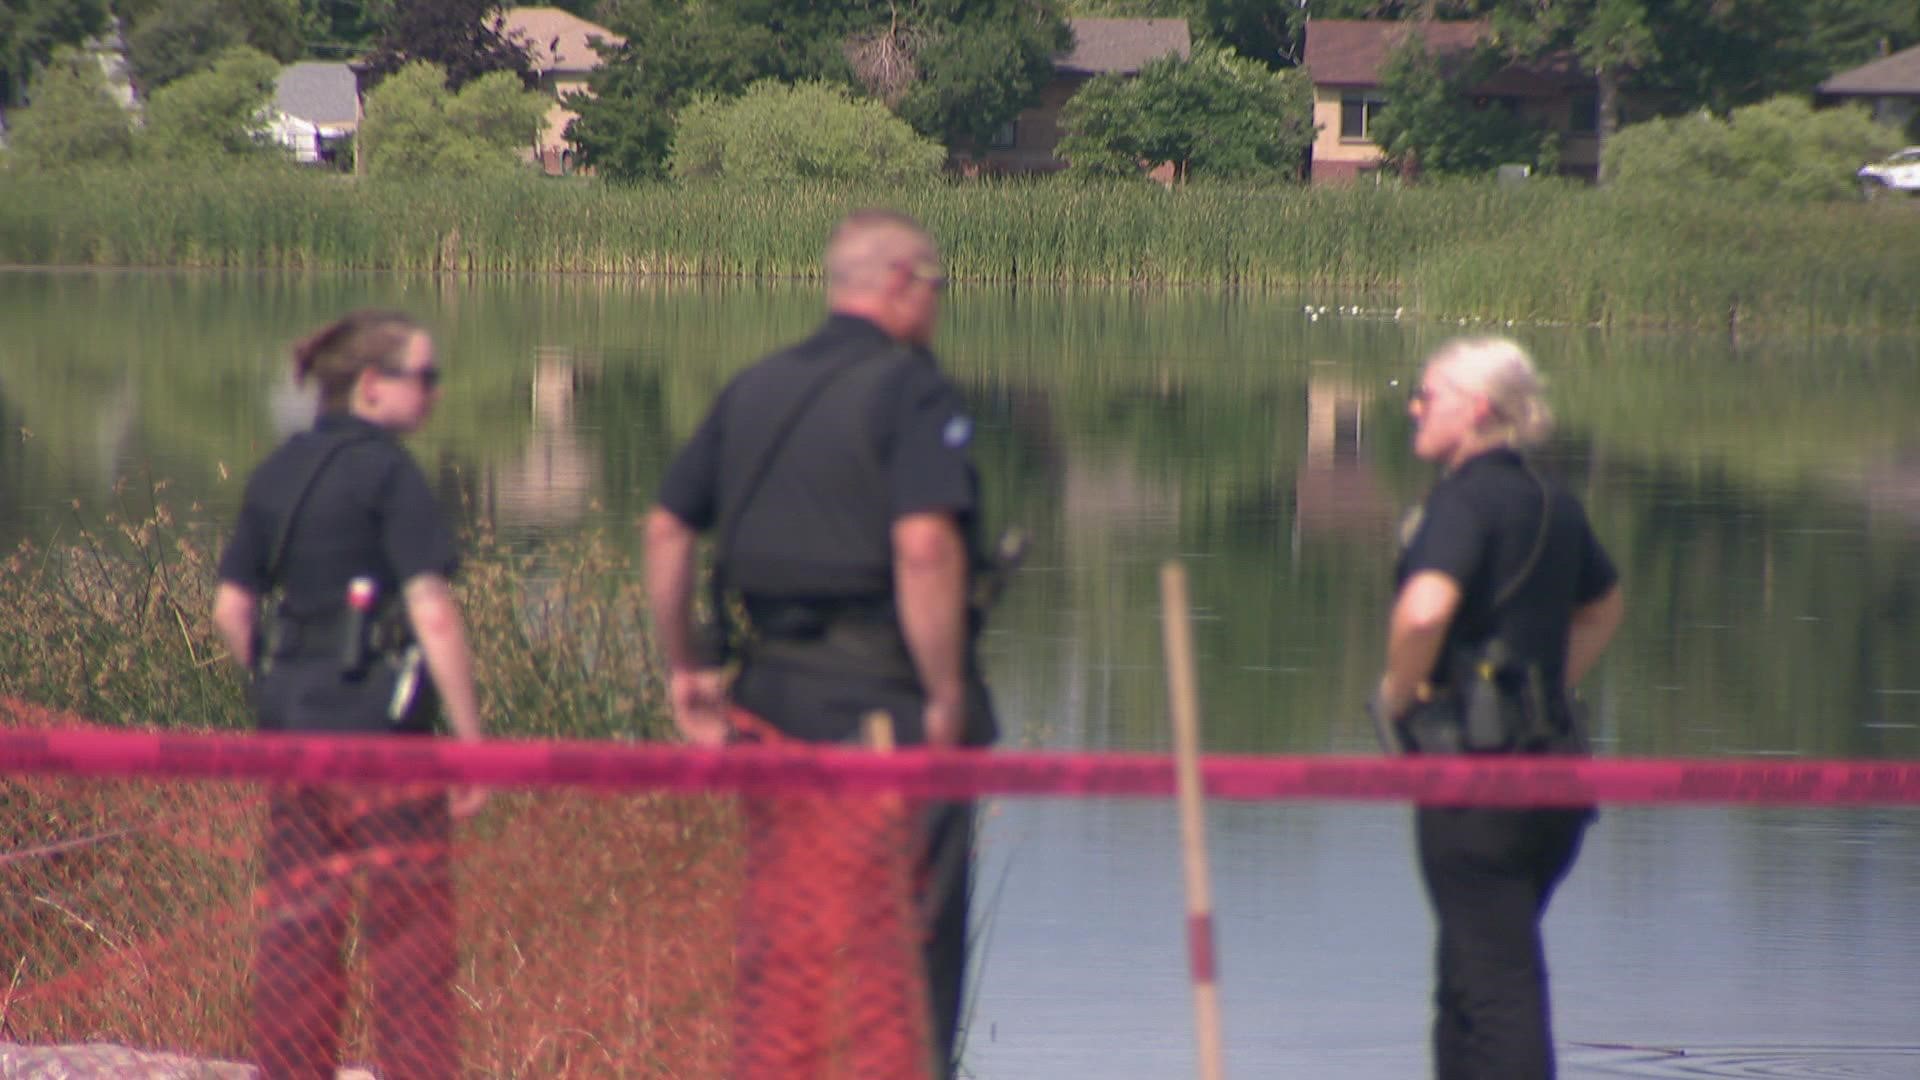 A body that was found in Rocky Mountain Lake in Denver is believed to be that of an 11-year-old girl with autism who had gone missing.